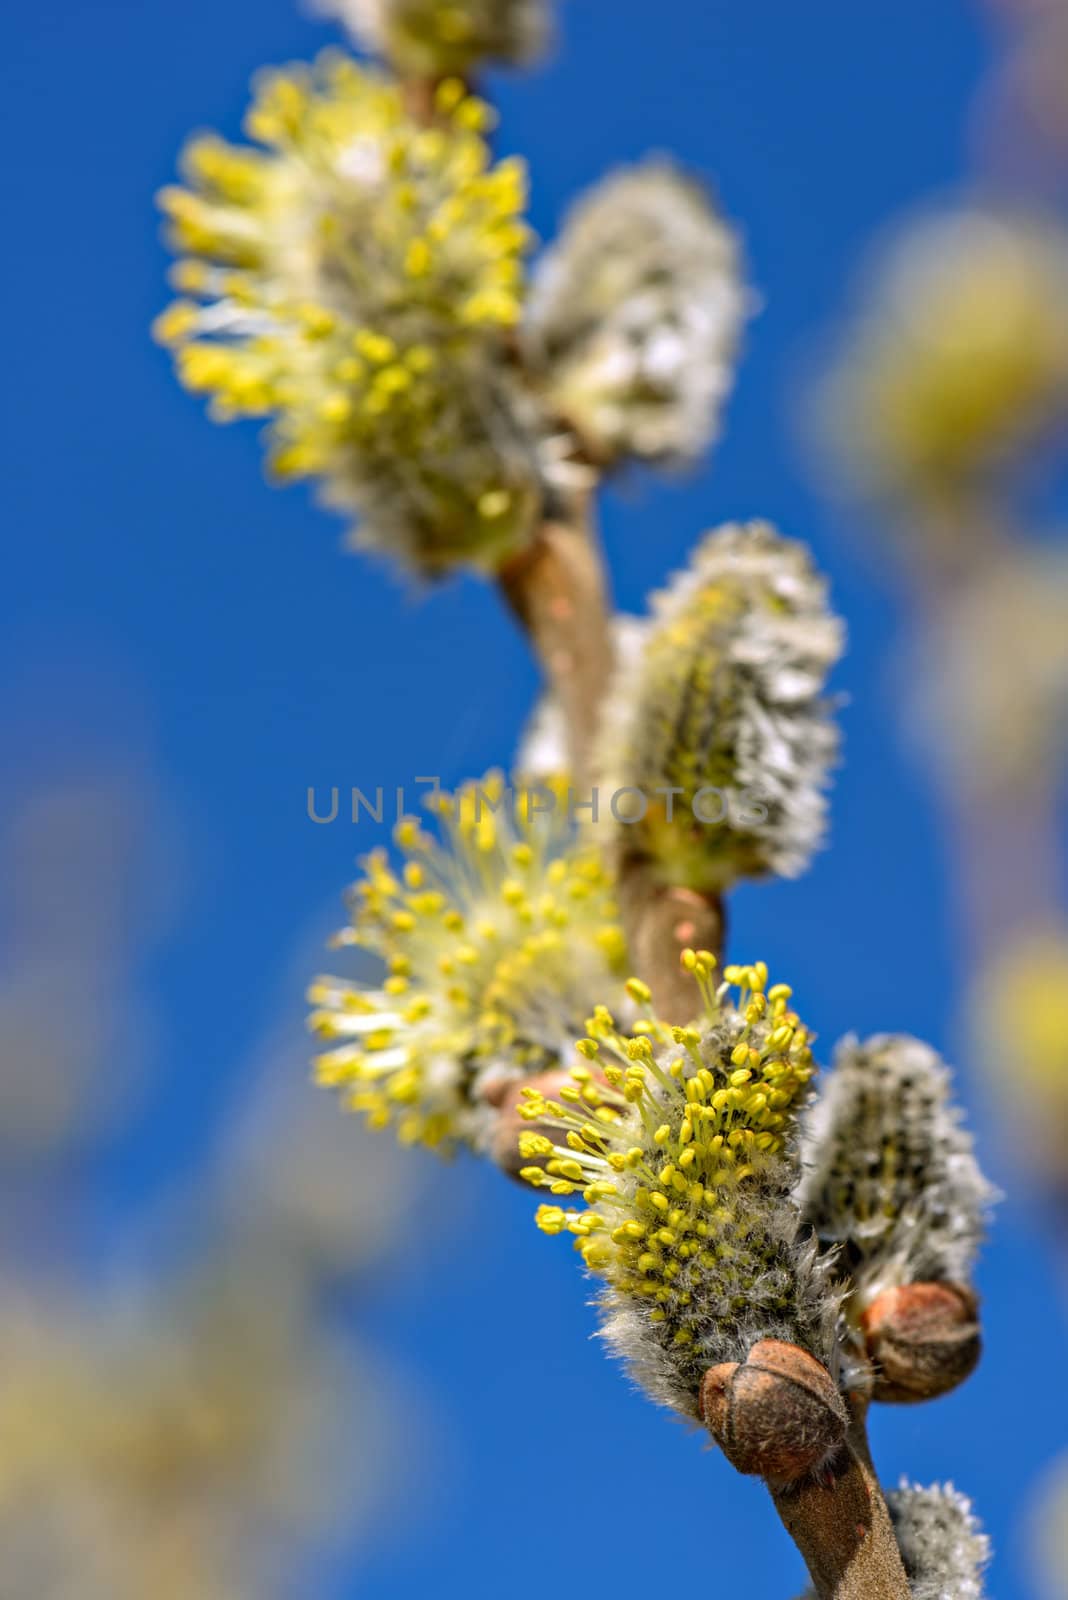 Closeup view of twig with spring buds over blue sky